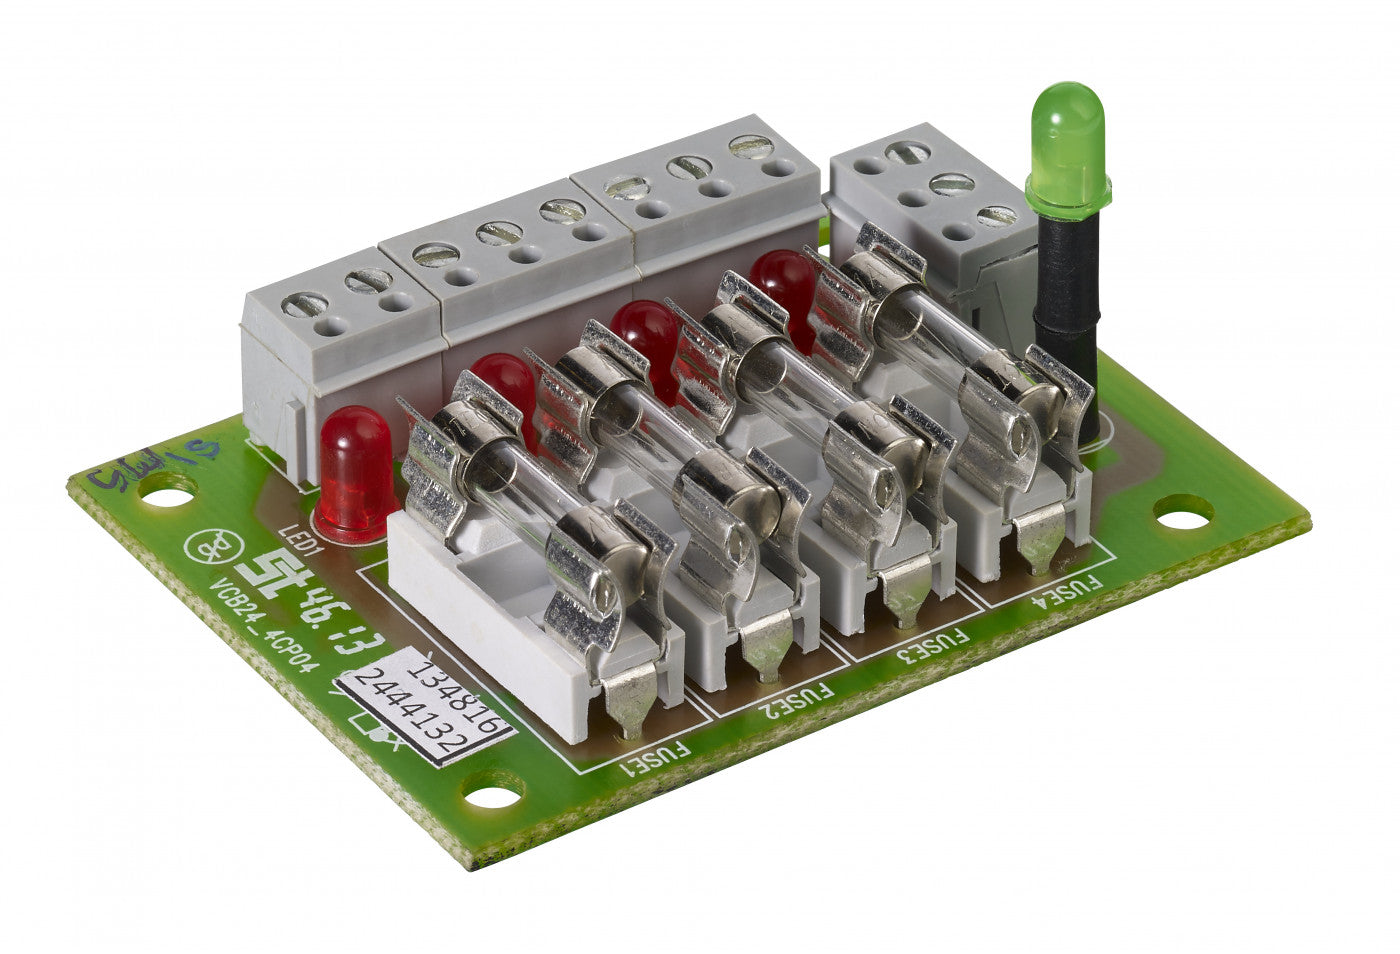 STP-4WAY - PCB board with 4 individual fused 1 amp outputs